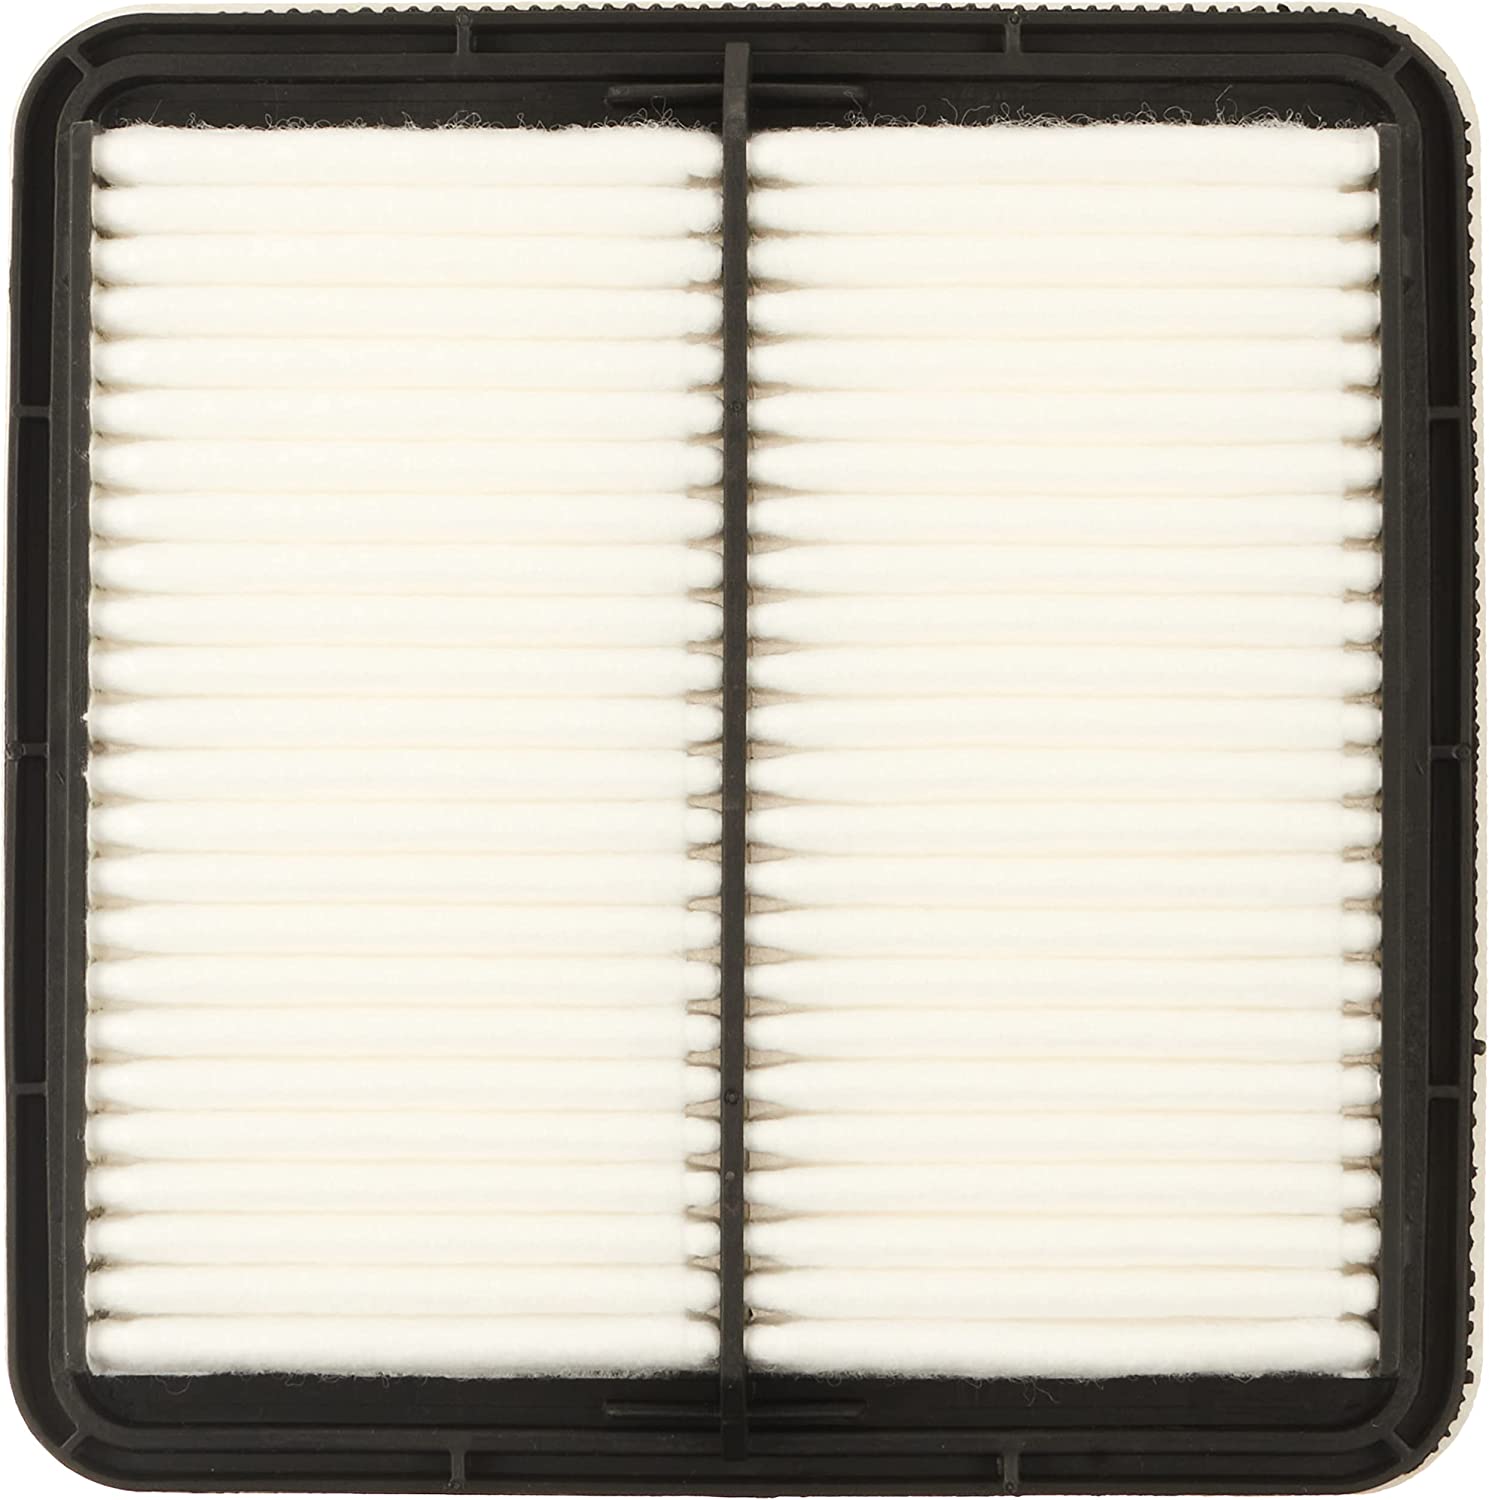 FRAM Extra Guard Engine Air Filter Replacement, Easy Install w/ Advanced Engine Protection and Optimal Performance, CA9997 for Select Subaru Vehicles